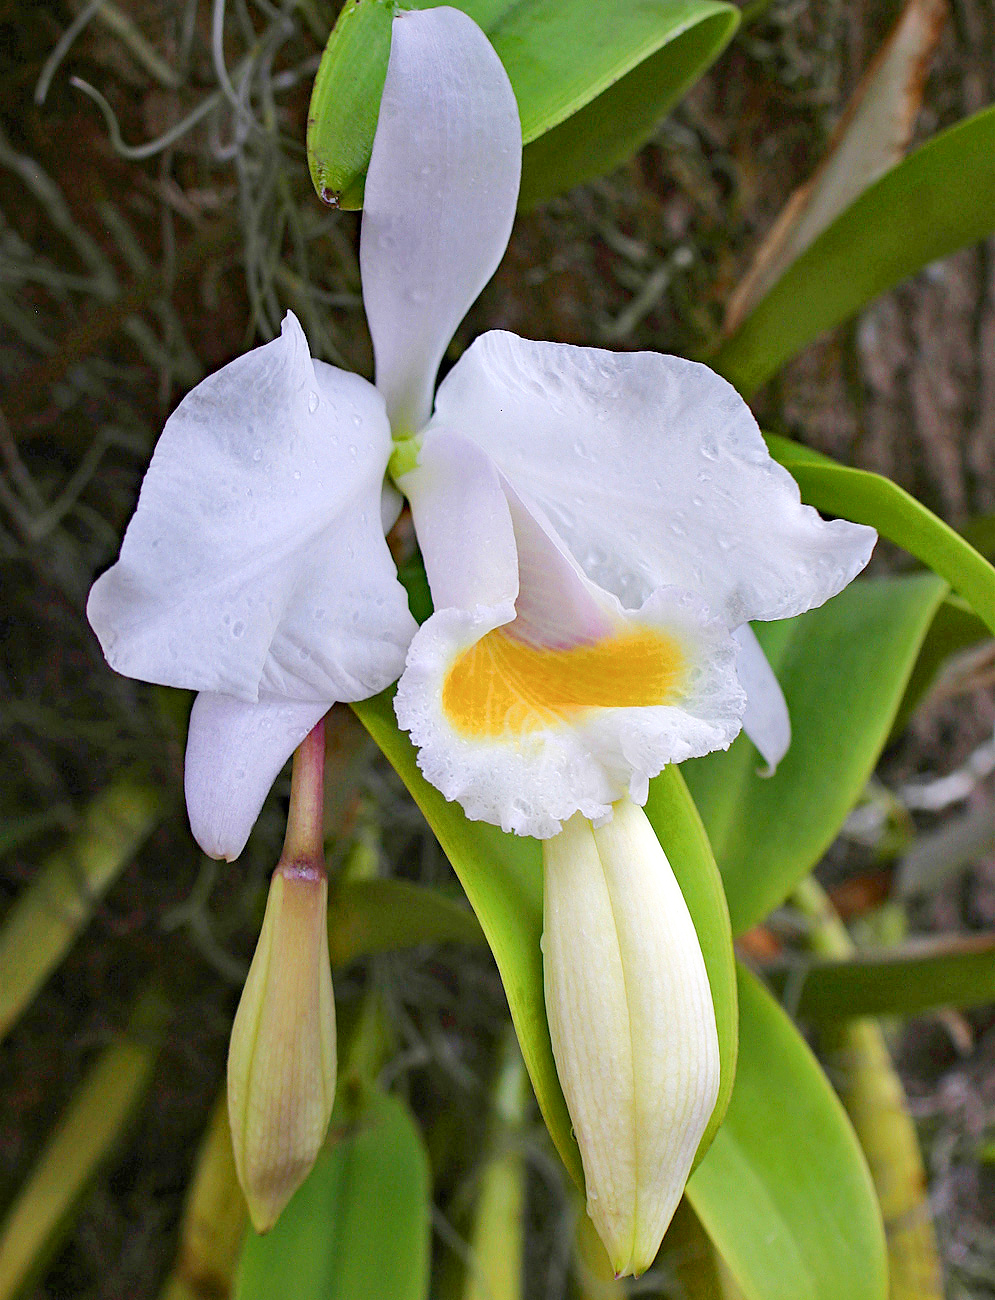 A white Cattleya Orchid flower with a yellow throat above two flower buds